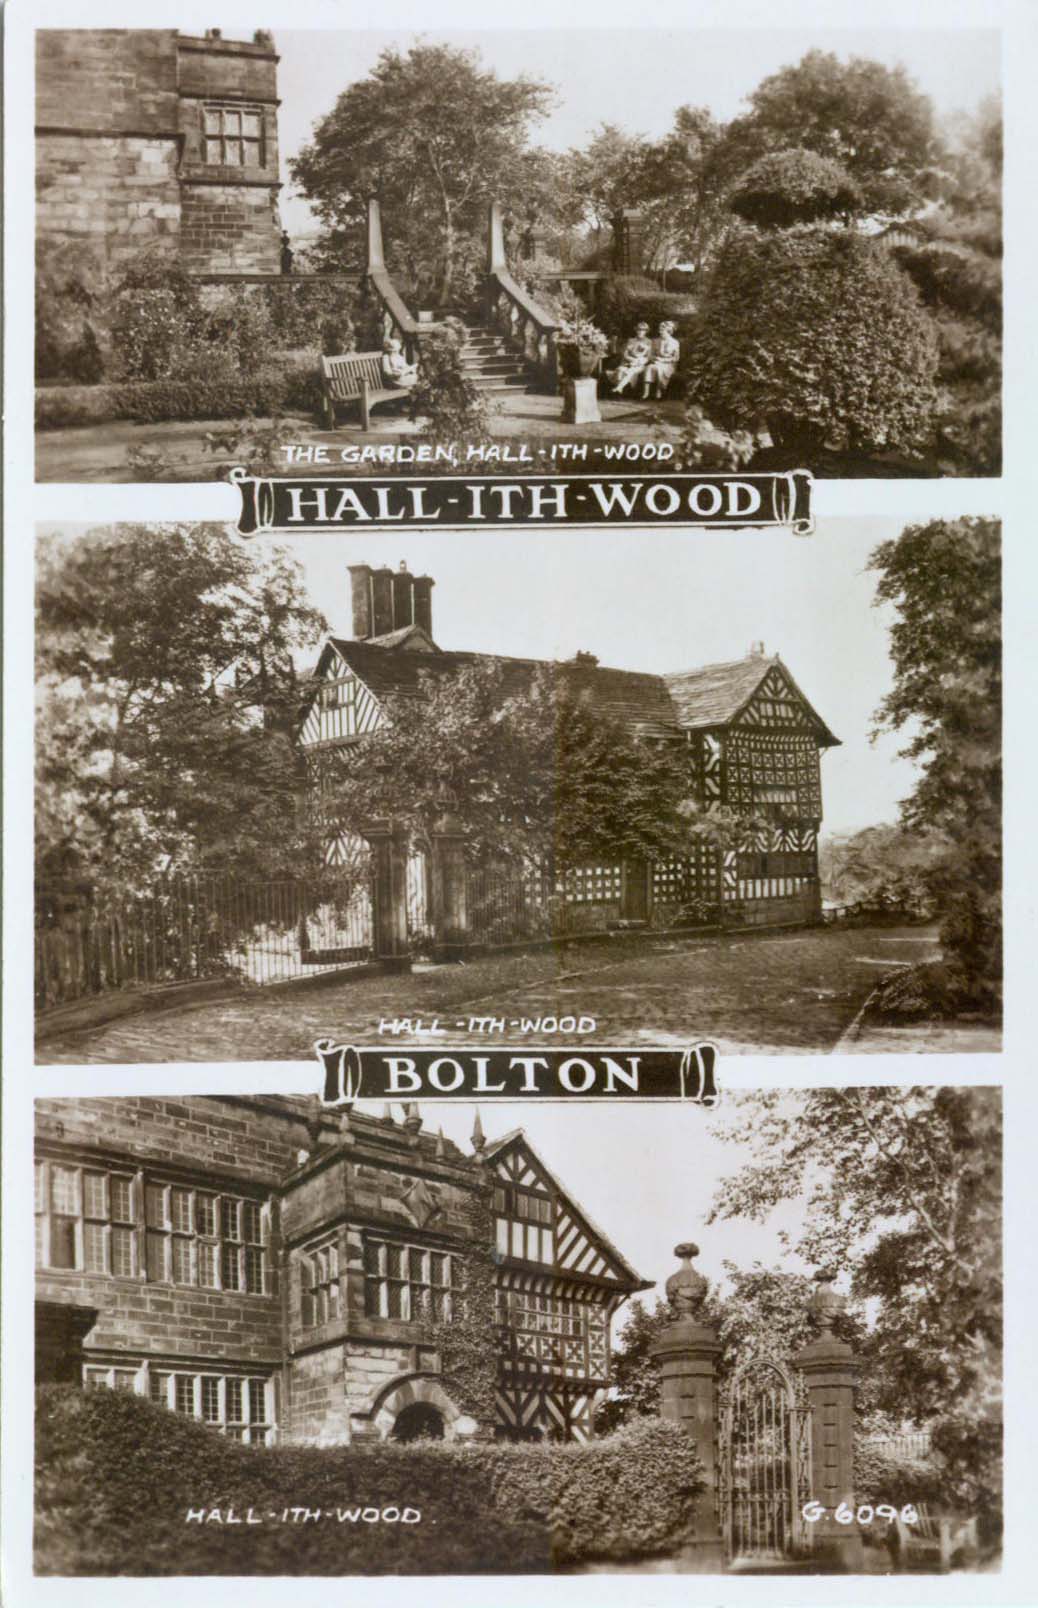 An Old Post Card view of Hall i'th Wood